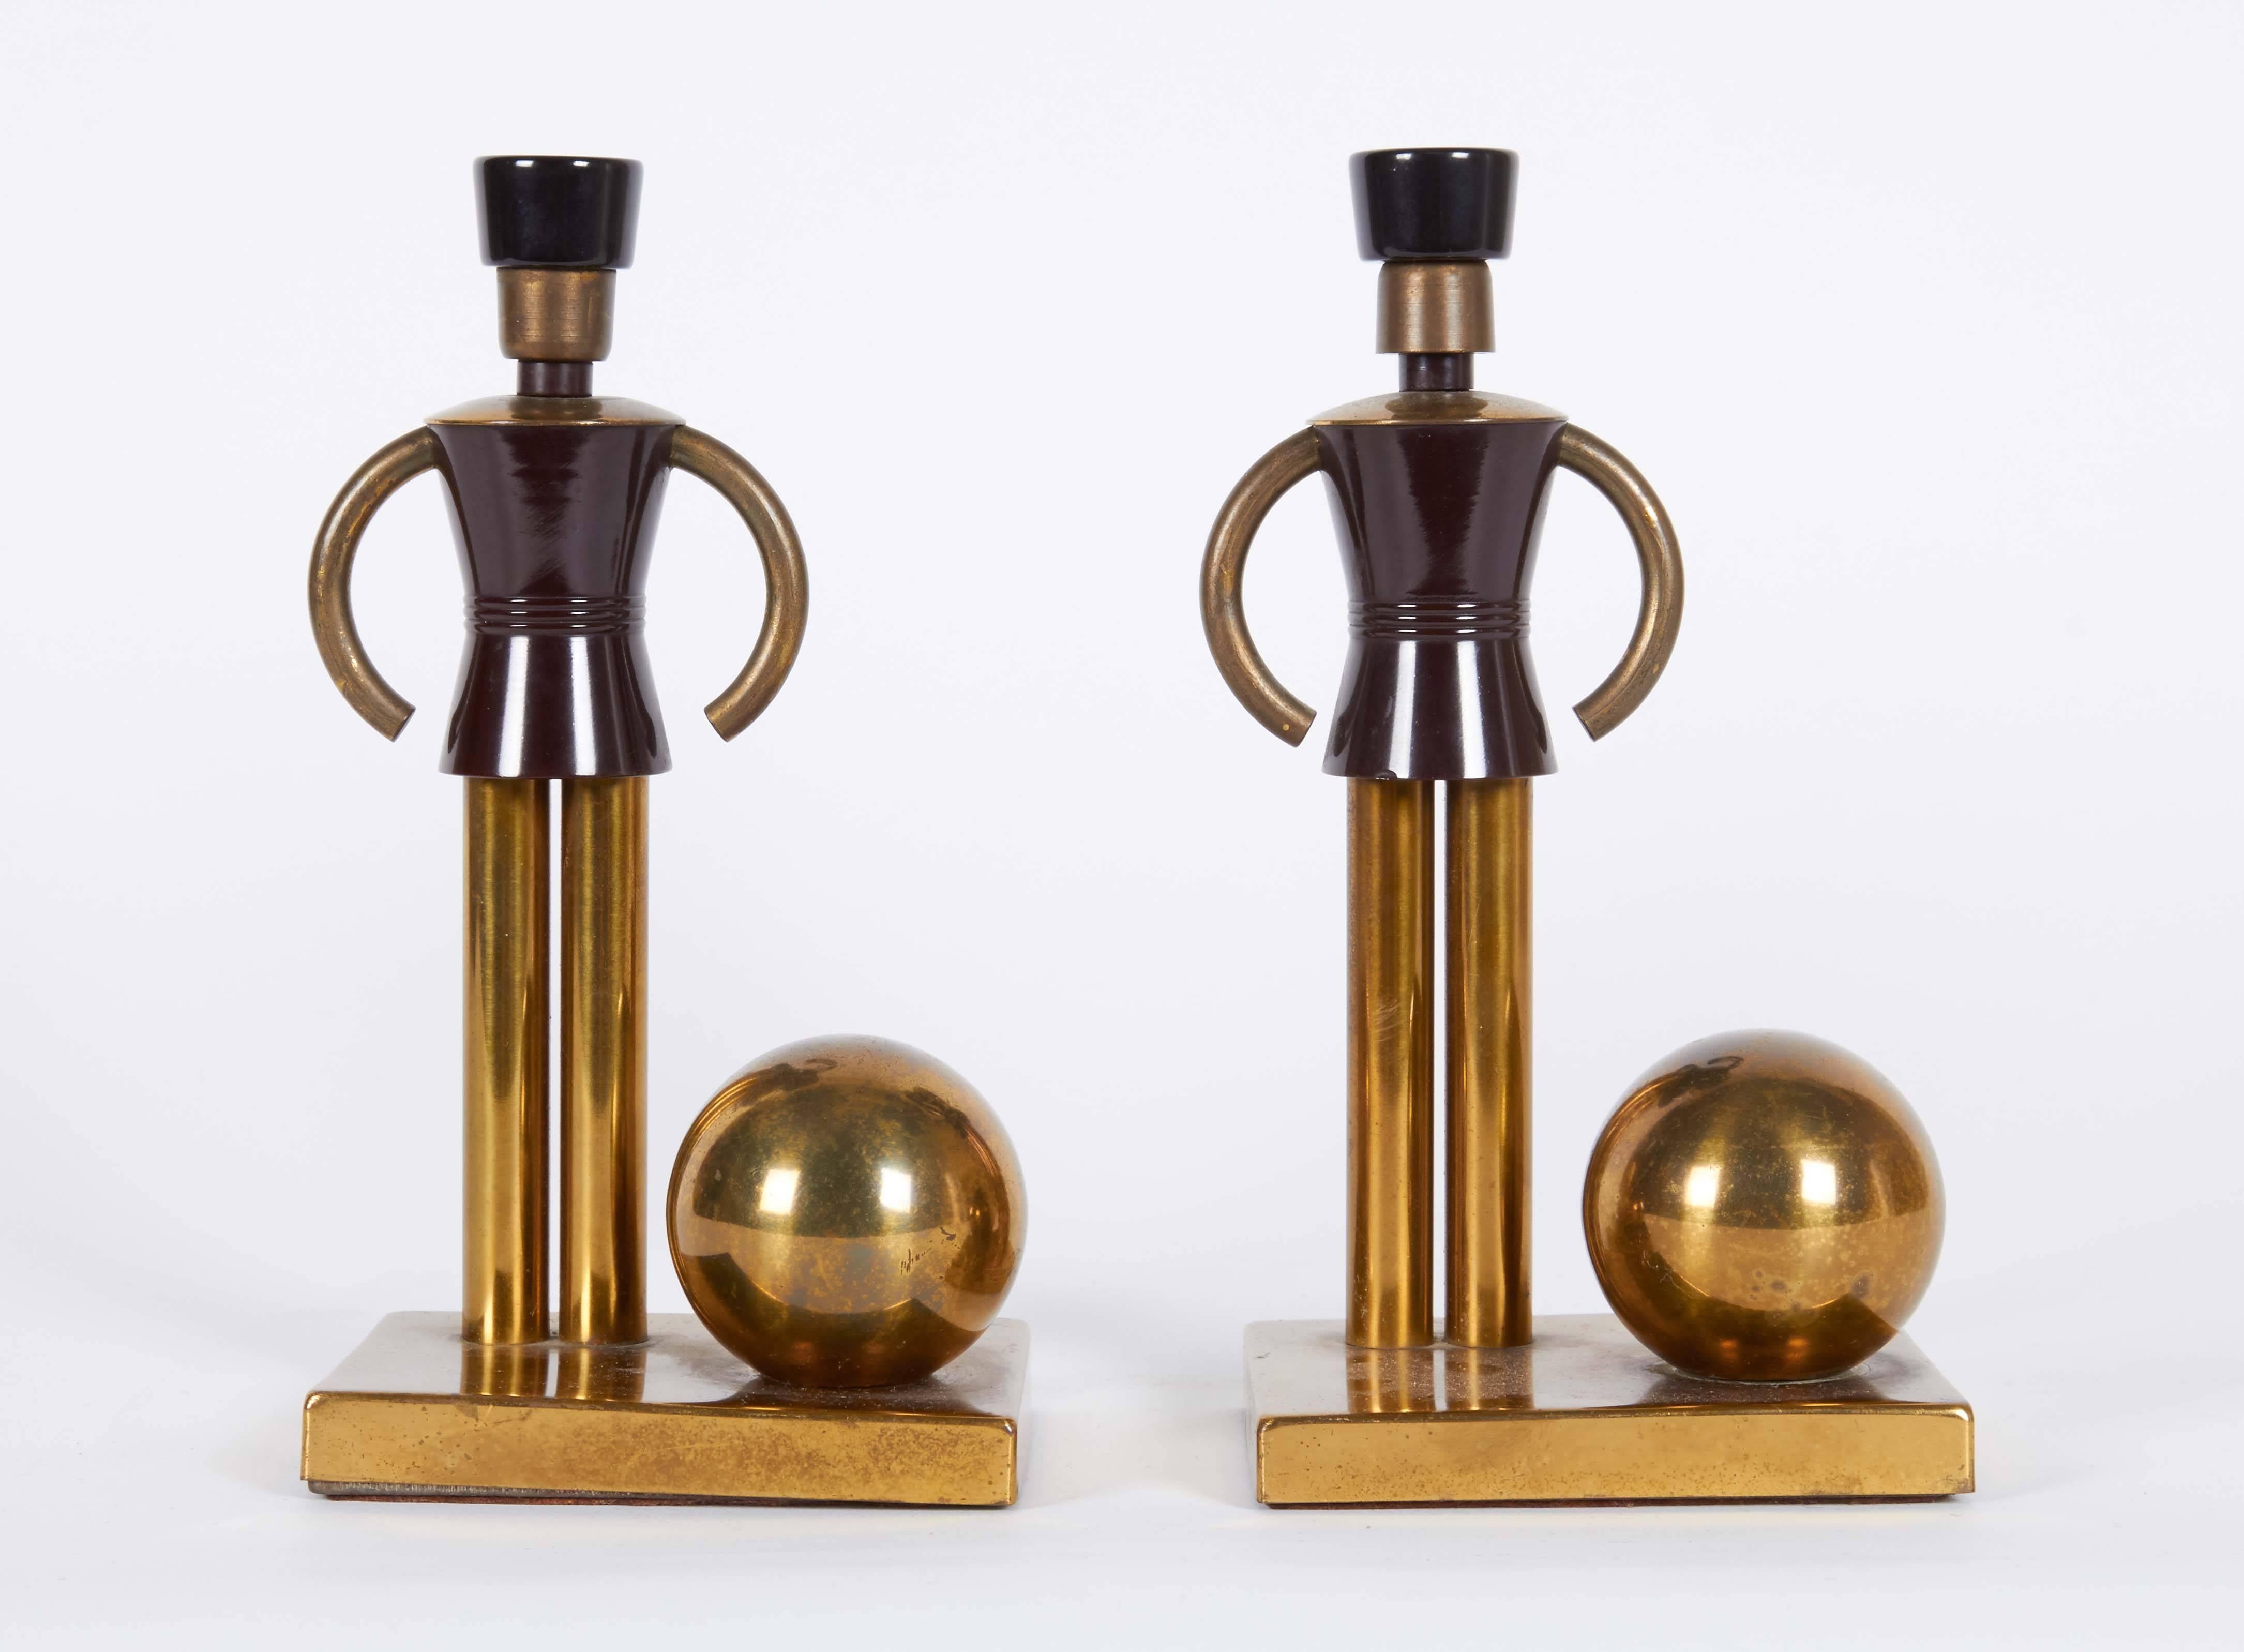 These streamlined Art Deco brass bookends, produced, circa 1940s, designed by Walter Von Nessen, depict figures of soldiers, detailed in black bakelite, with ball motif. Very good vintage condition, wear consistent with age and use.